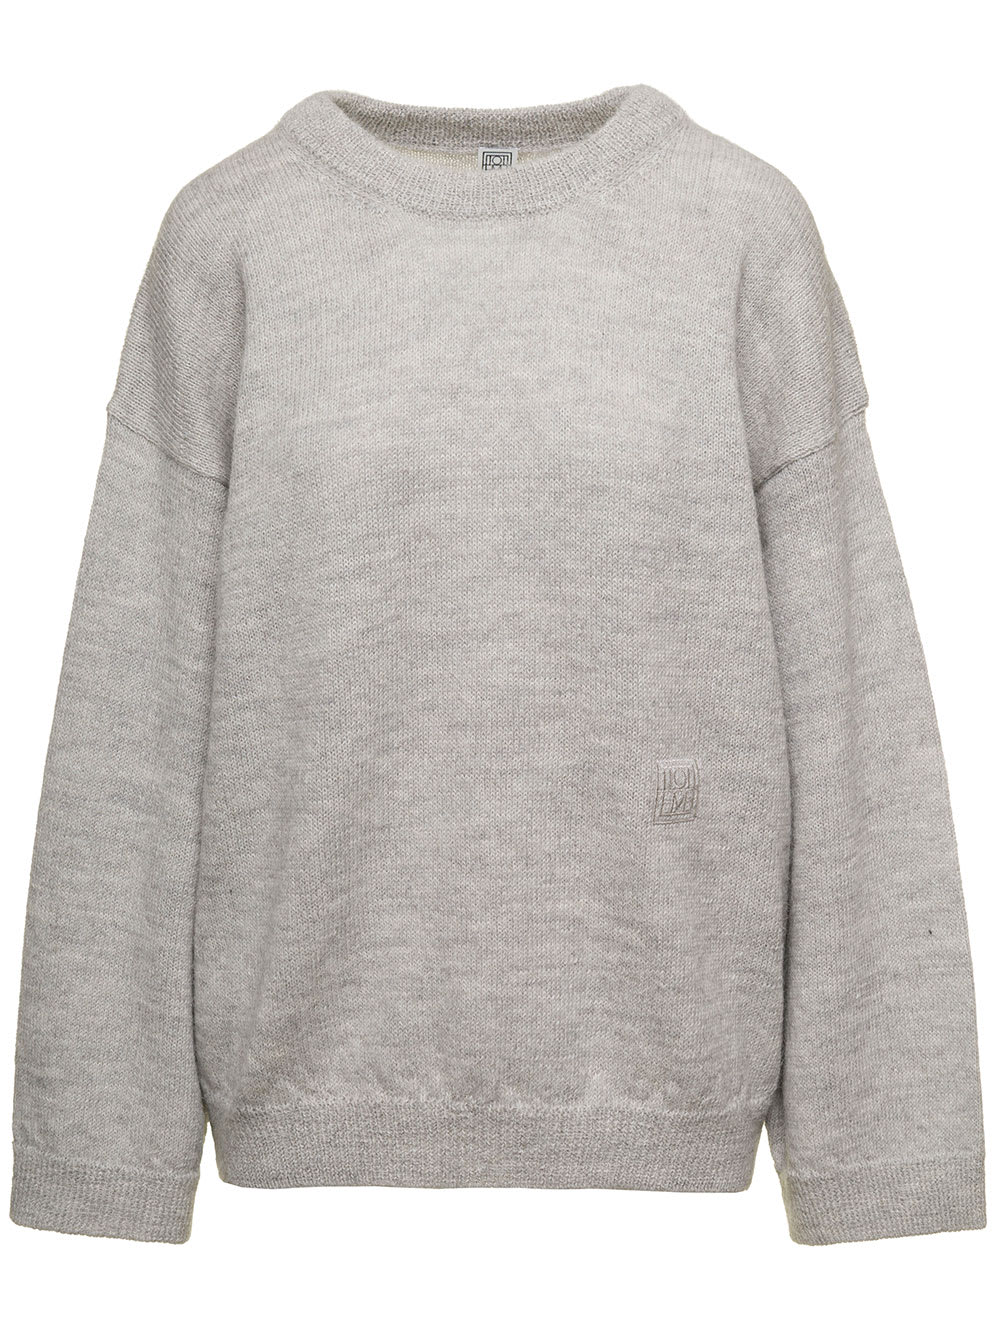 TOTÊME GREY MONOCHROME SWEATER WITH SIDE EMBROIDERED LOGO IN WOOL BLEND WOMAN